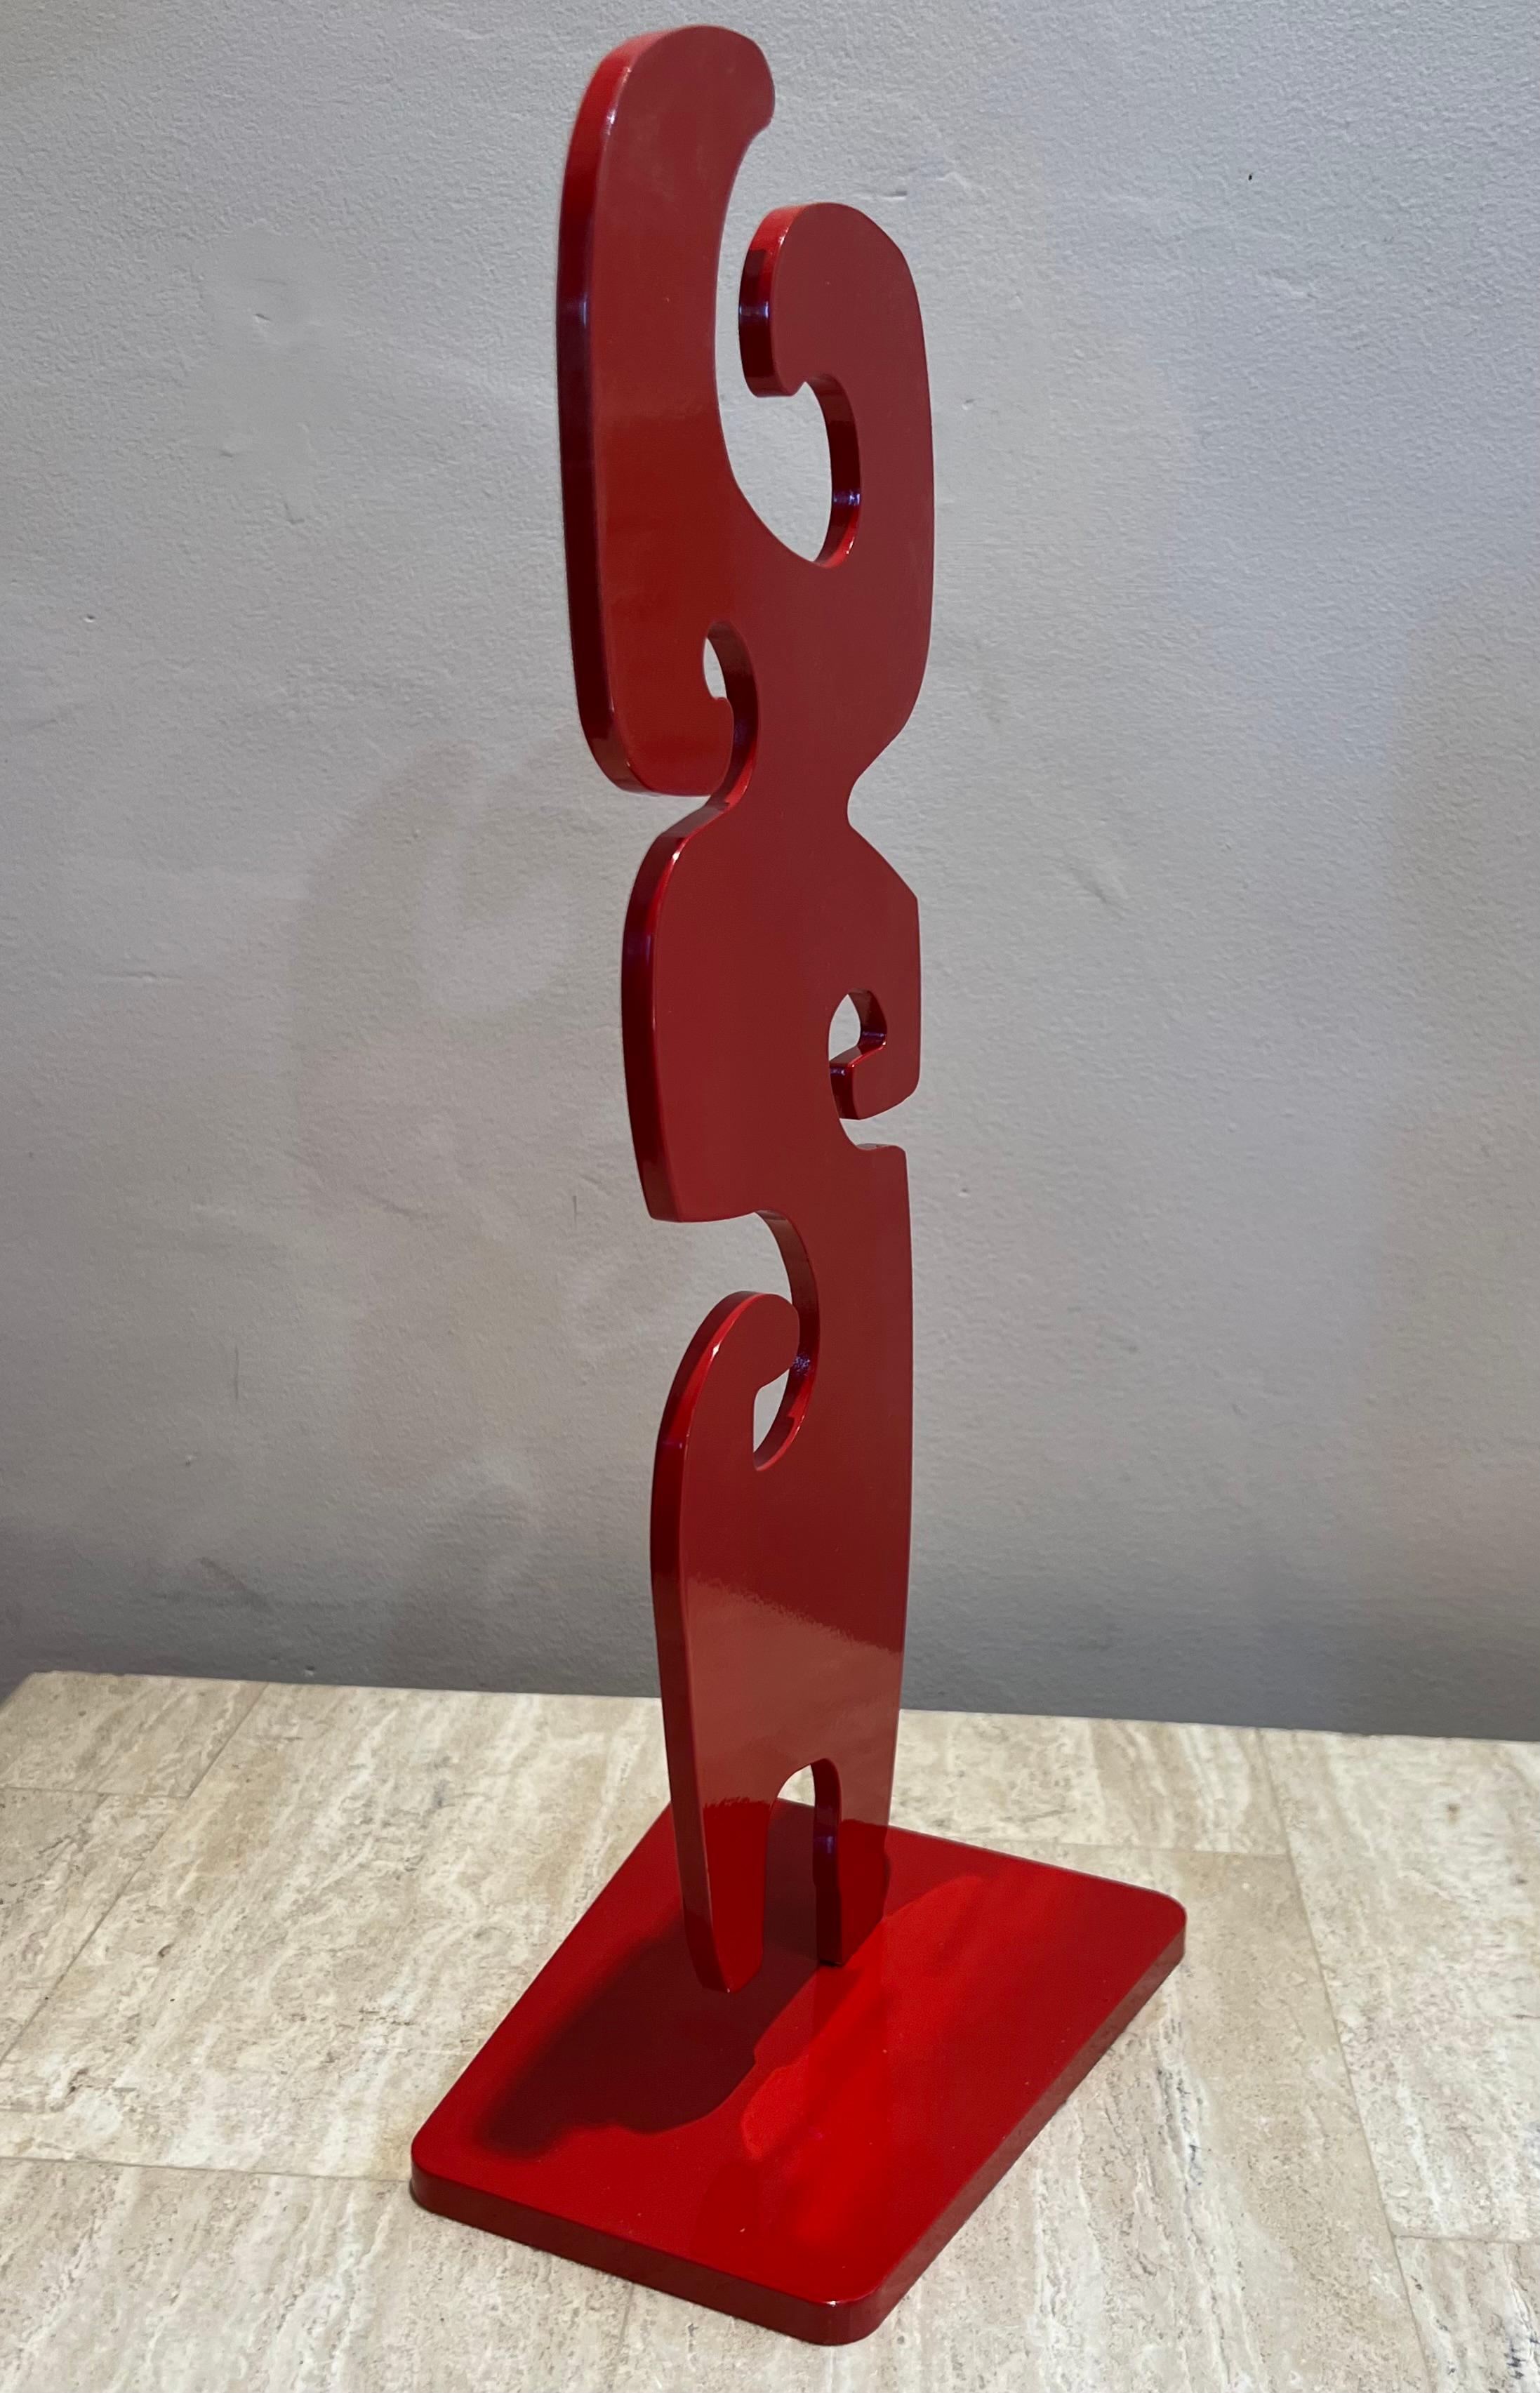 Grandmother, by Melanie Yazzie, sculpture, edition, aluminum, red, abstract  2